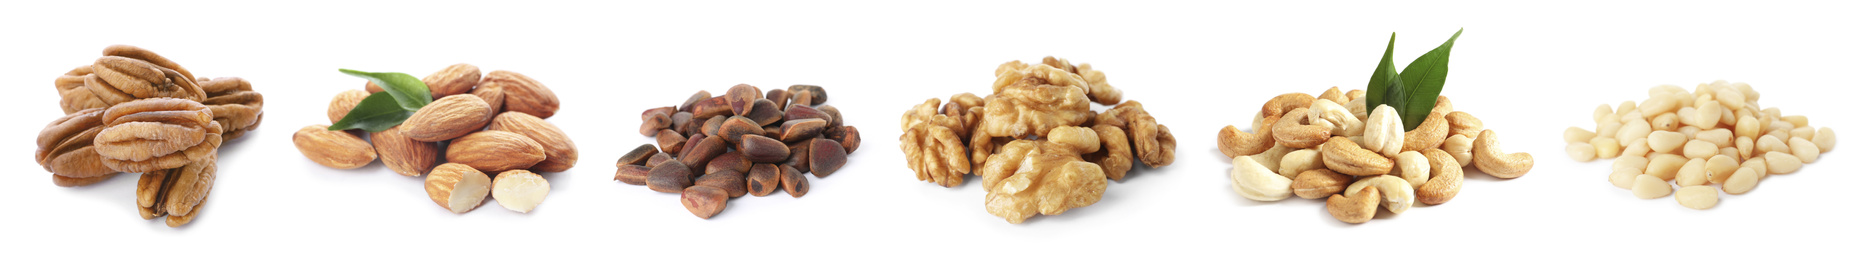 Image of Set of different nuts on white background. Banner design